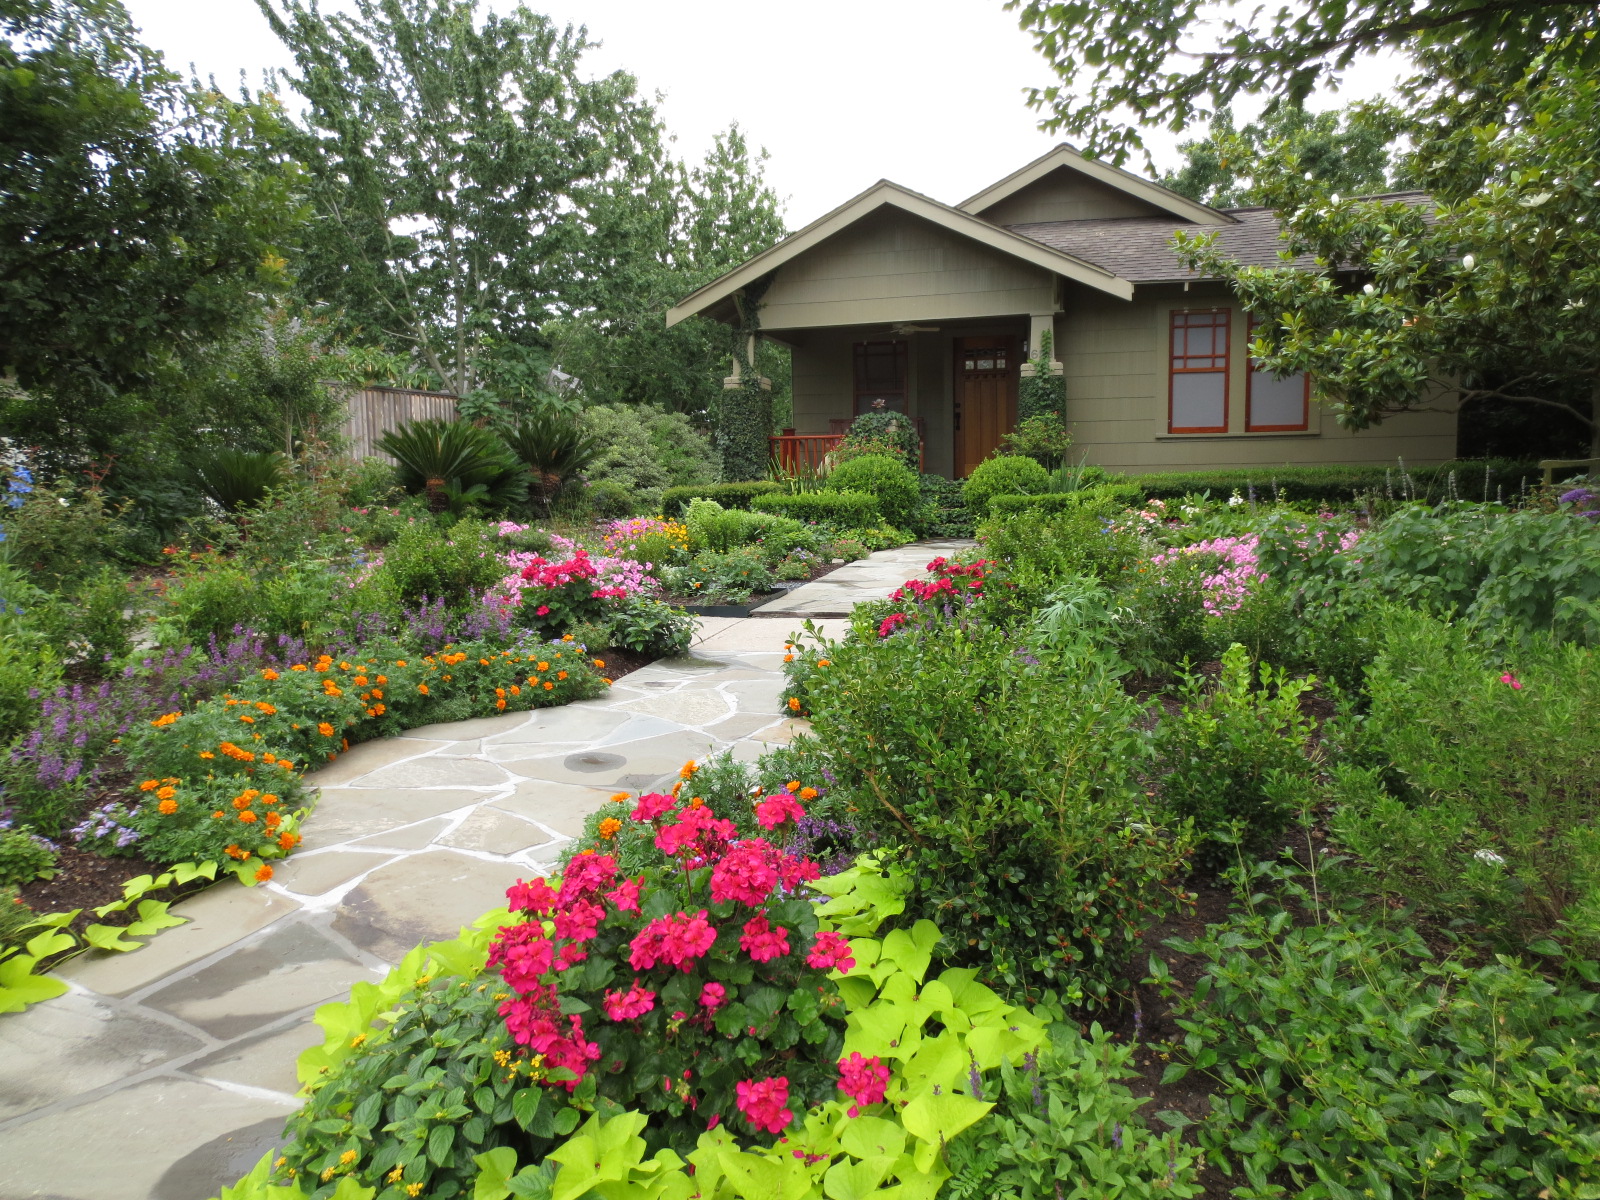 The OtHeR HoUsToN: GREAT BUNGALOW GARDEN IDEAS